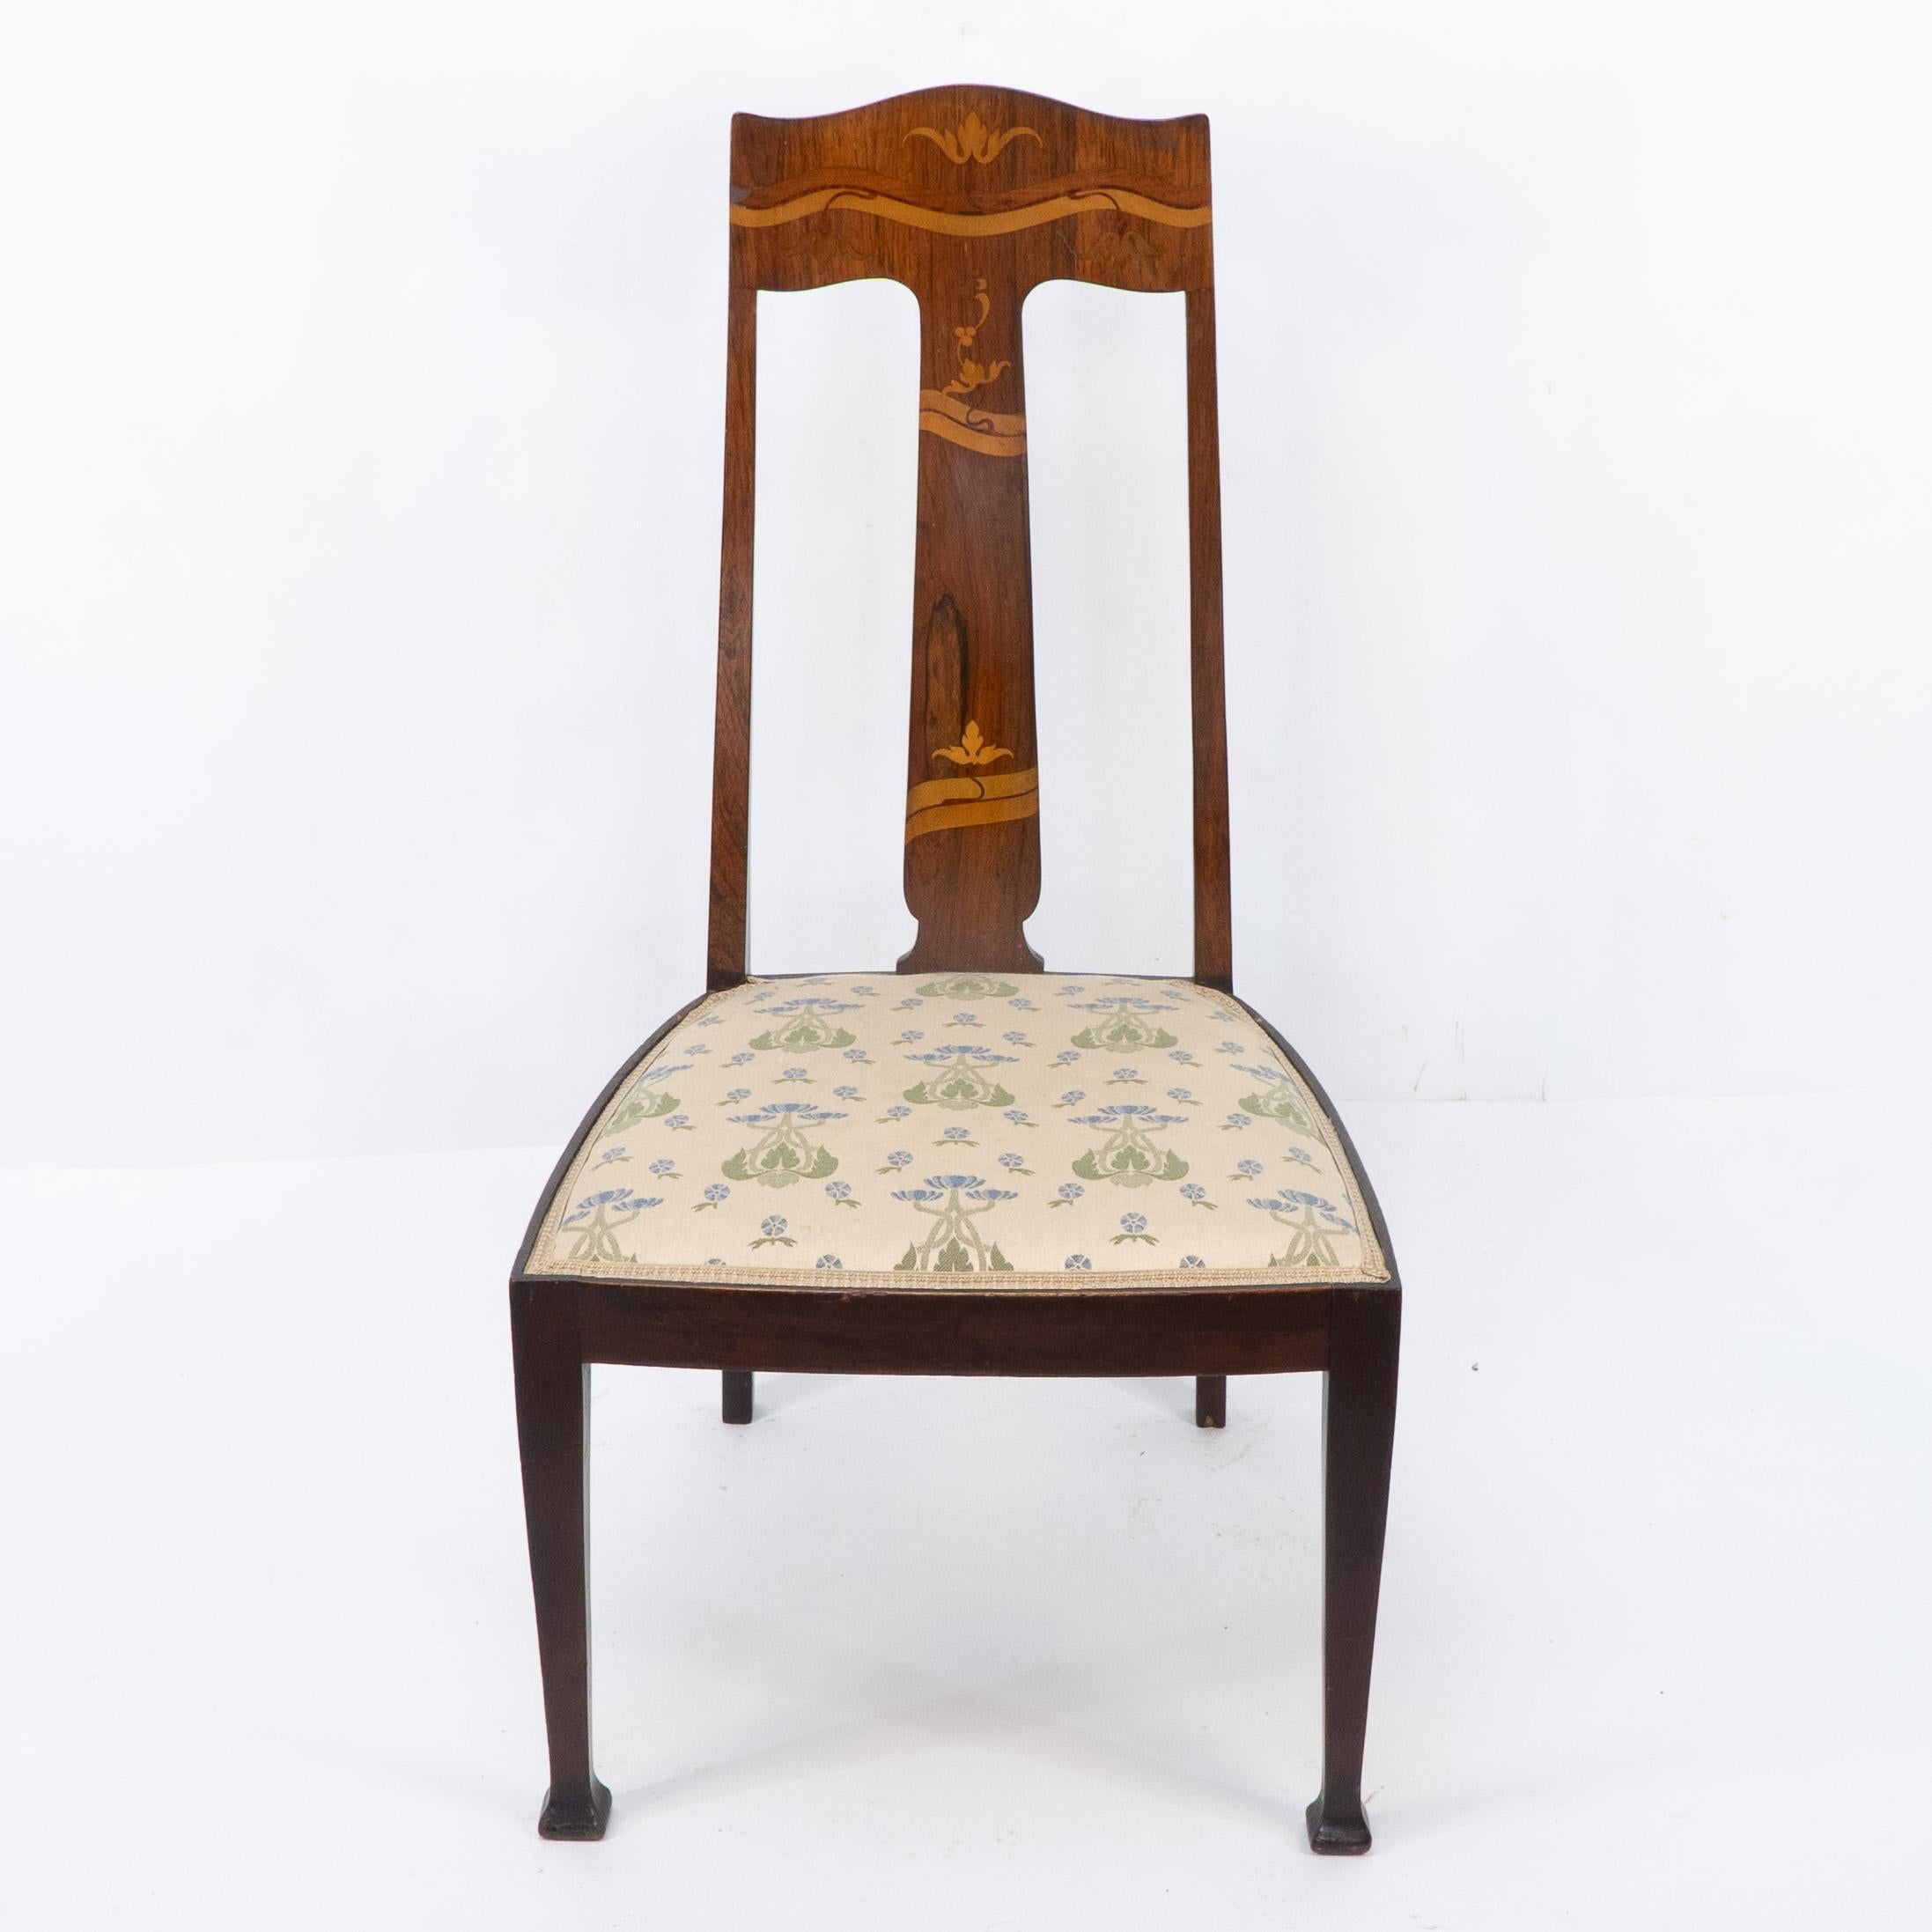 An Arts and Crafts Mahogany and Rosewood nursing chair made by Jas Shoolbred with stylised floral inlaid details to the back and head rest. Original label to the underneath.